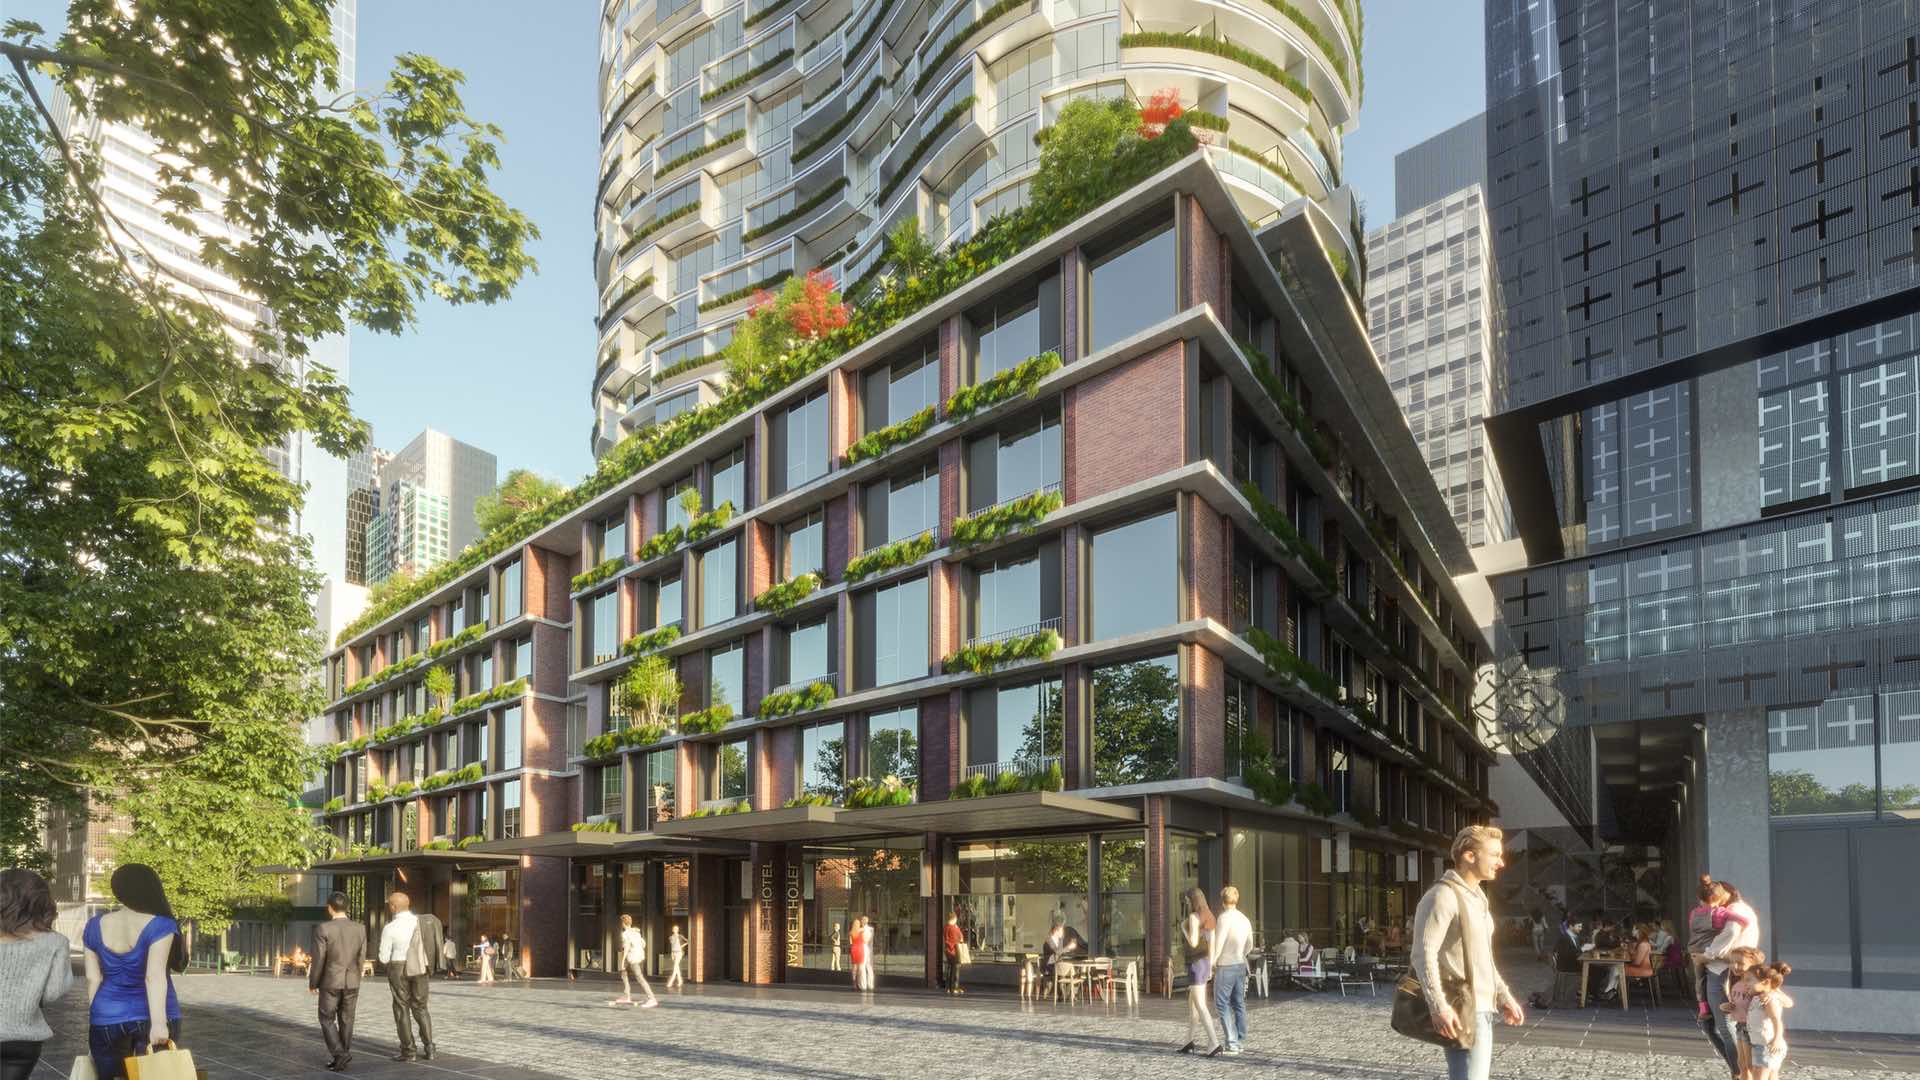 The Queen Victoria Market's Community-Focused Munro Development Has Been Given the Go-Ahead